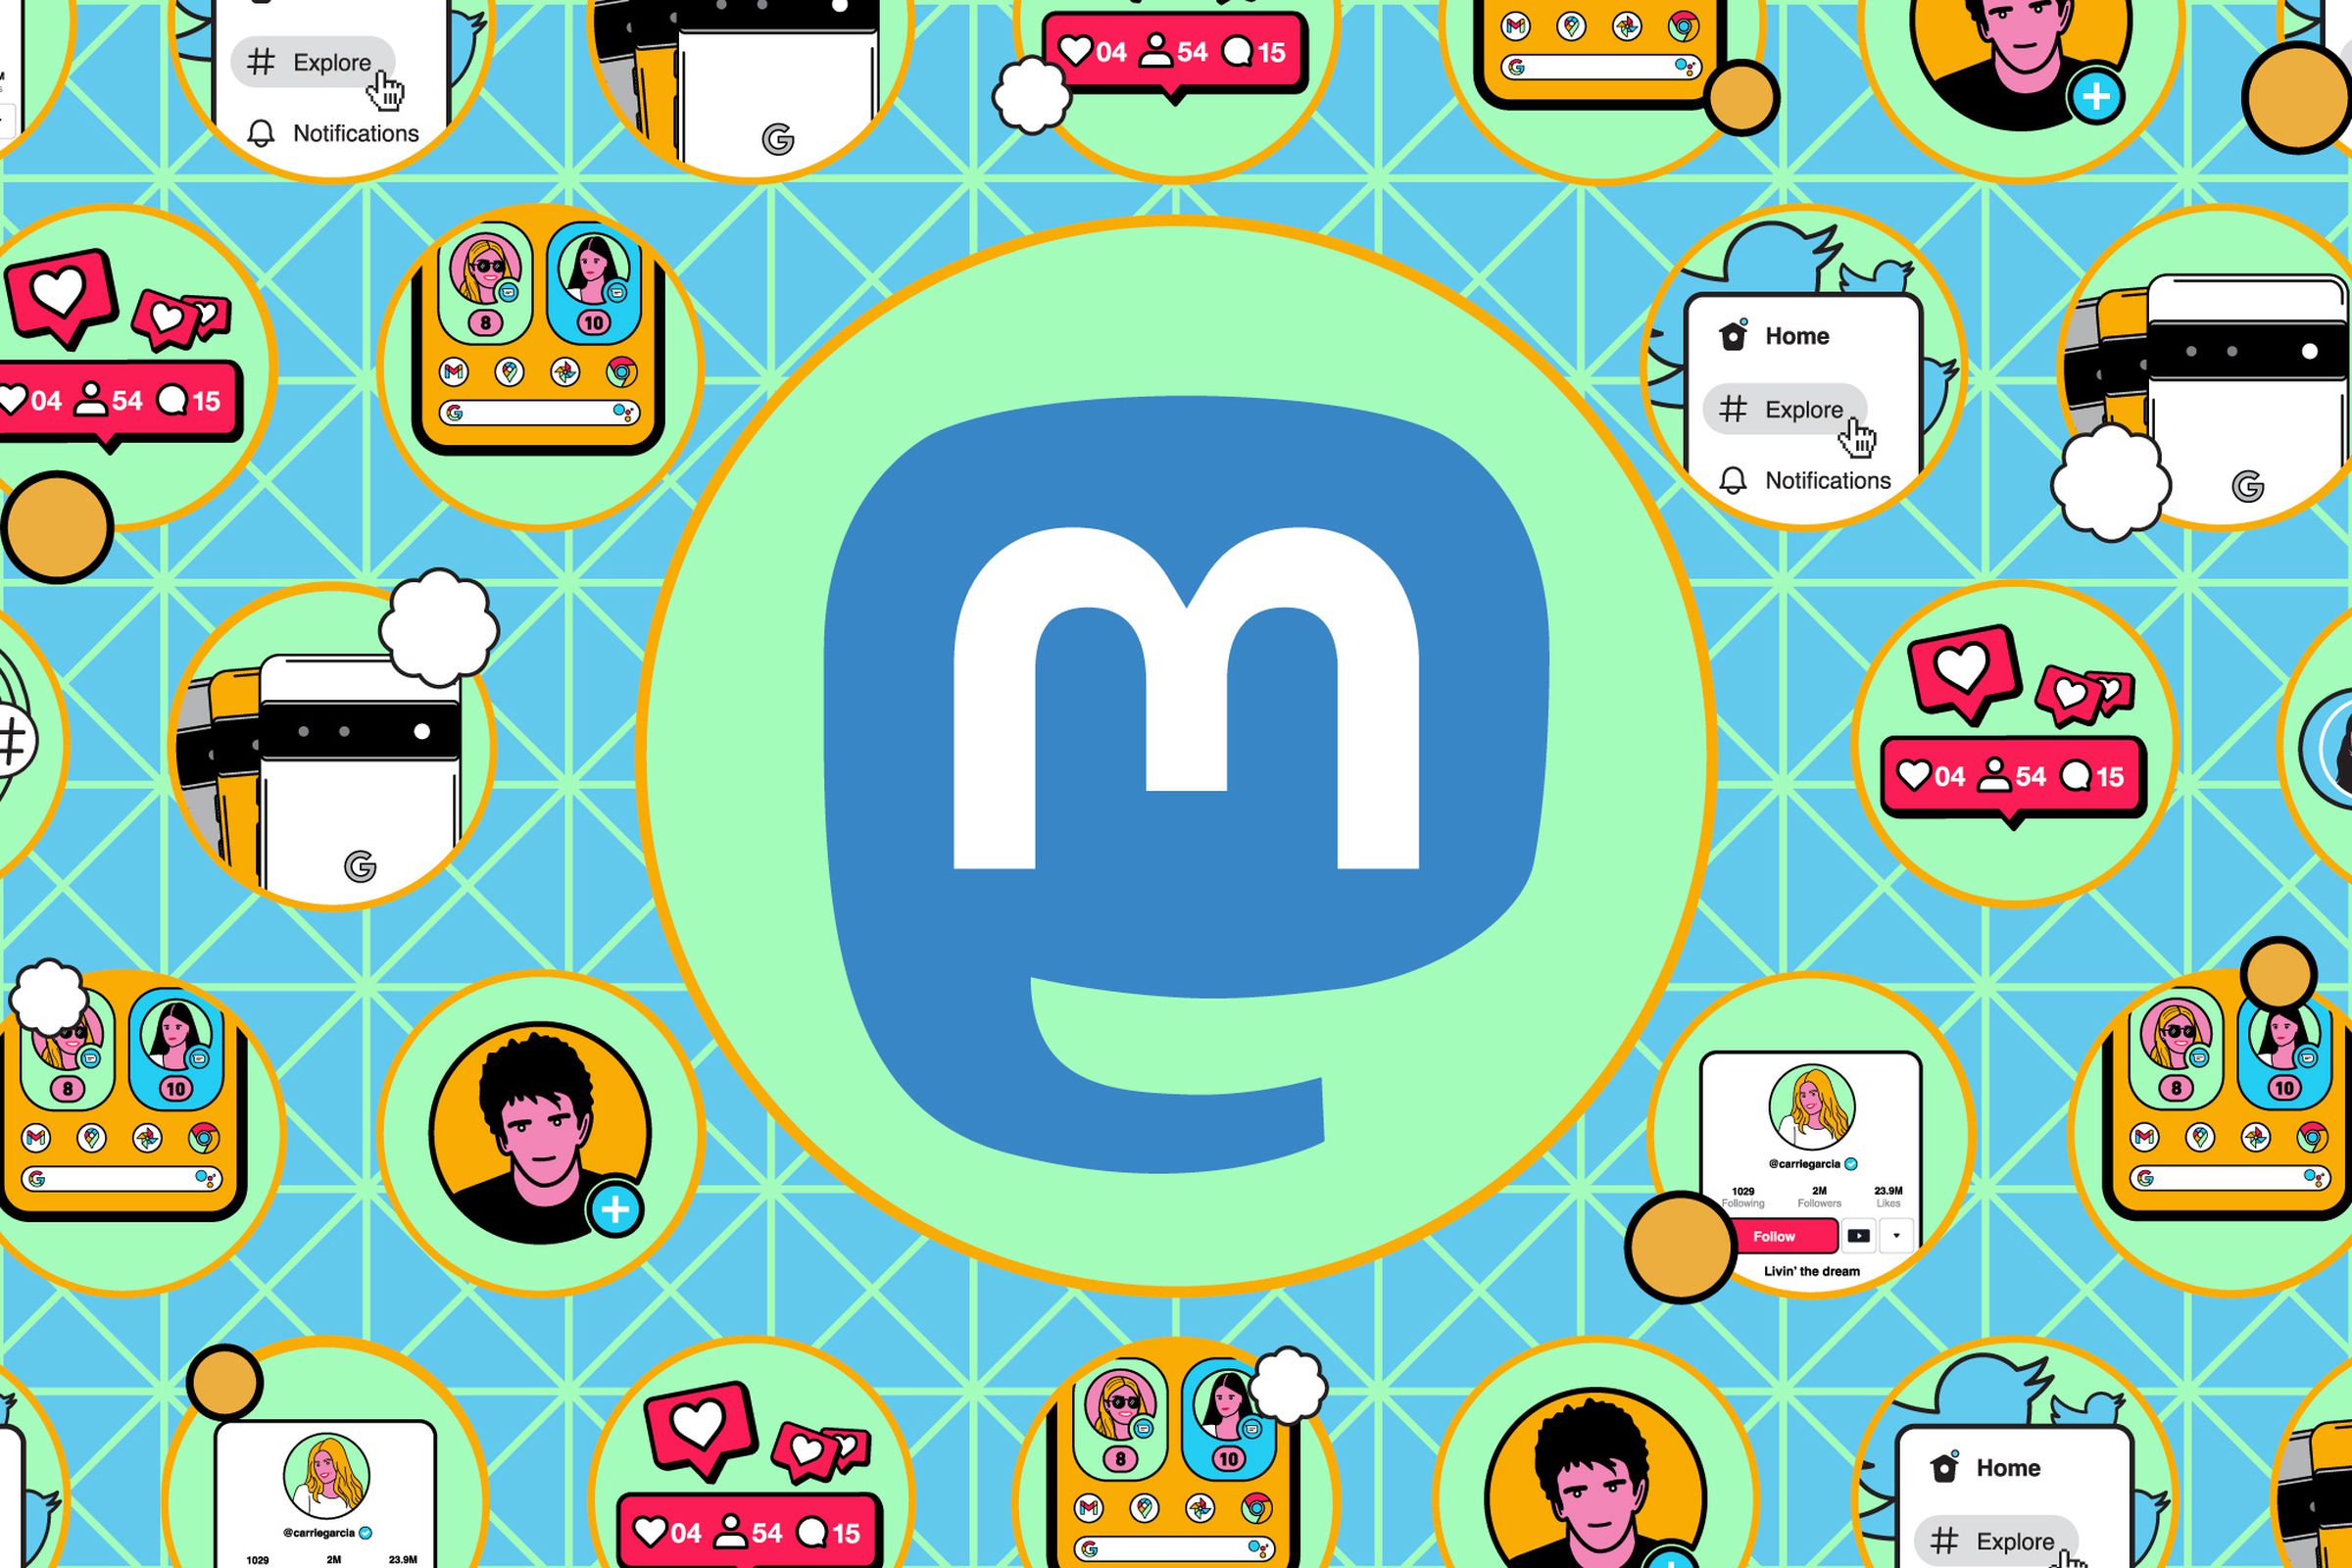 The logo for Mastodon against a blue background with several small illustrations.